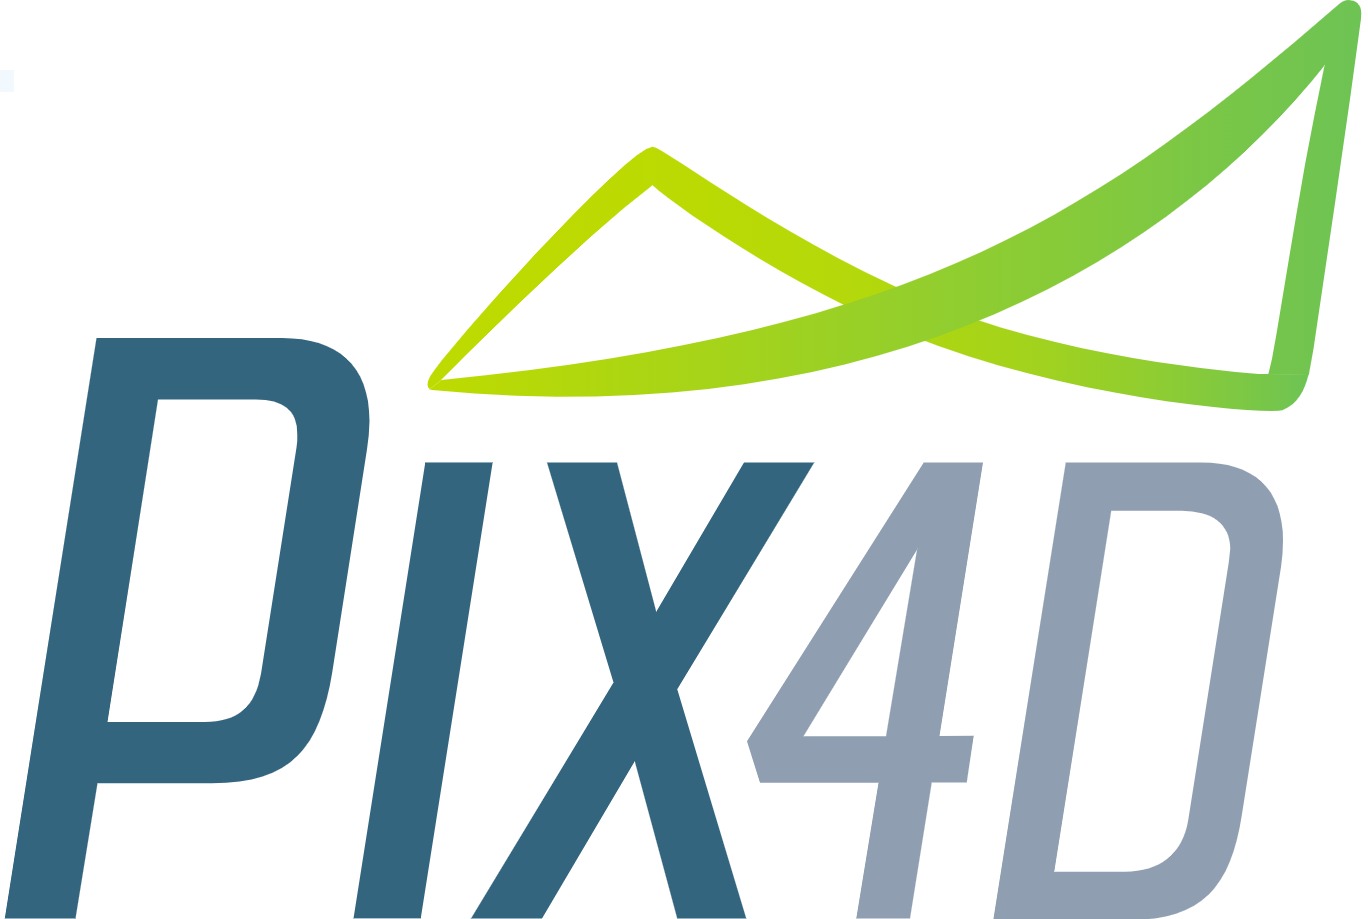 Pix4D Logo (all rights to this image belong to Pix4D)